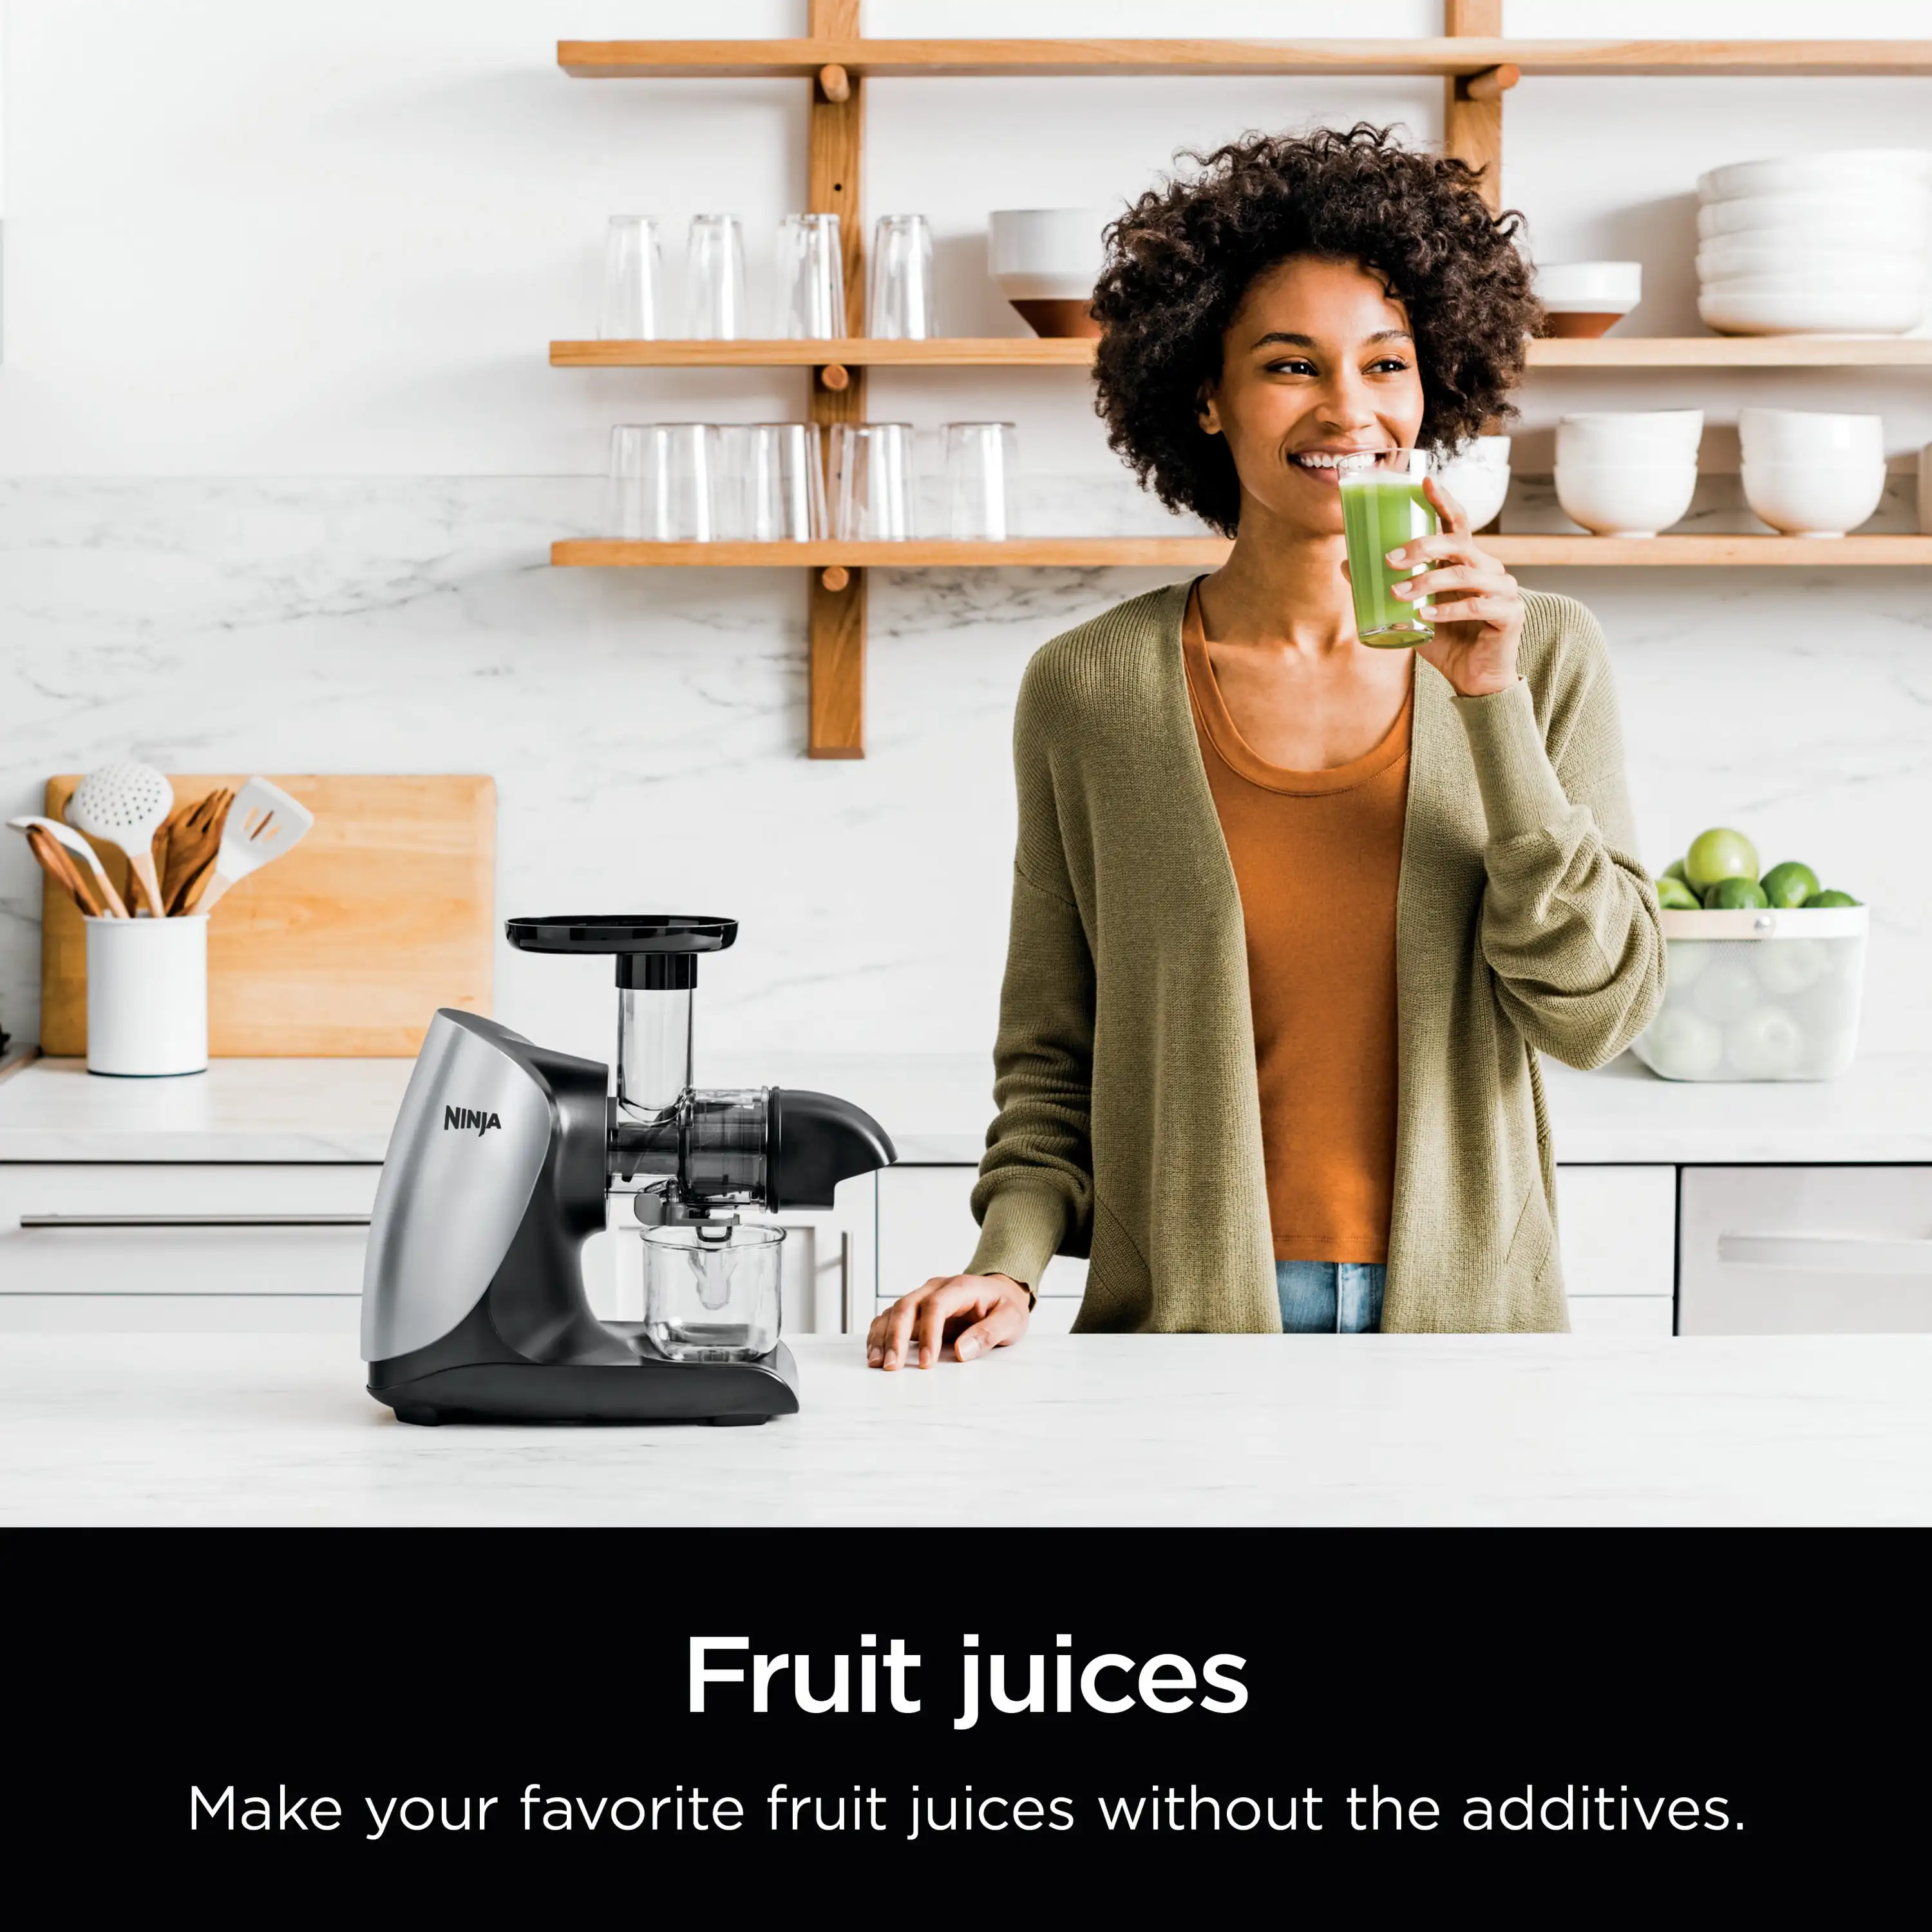 https://ae01.alicdn.com/kf/S488a32e5e5484ff5b16806b126081a89v/Ninja-Cold-Press-Juicer-Pro-Powerful-Slow-Juicer-with-Total-Pulp-Control-Cloud-Silver-JC100.jpg